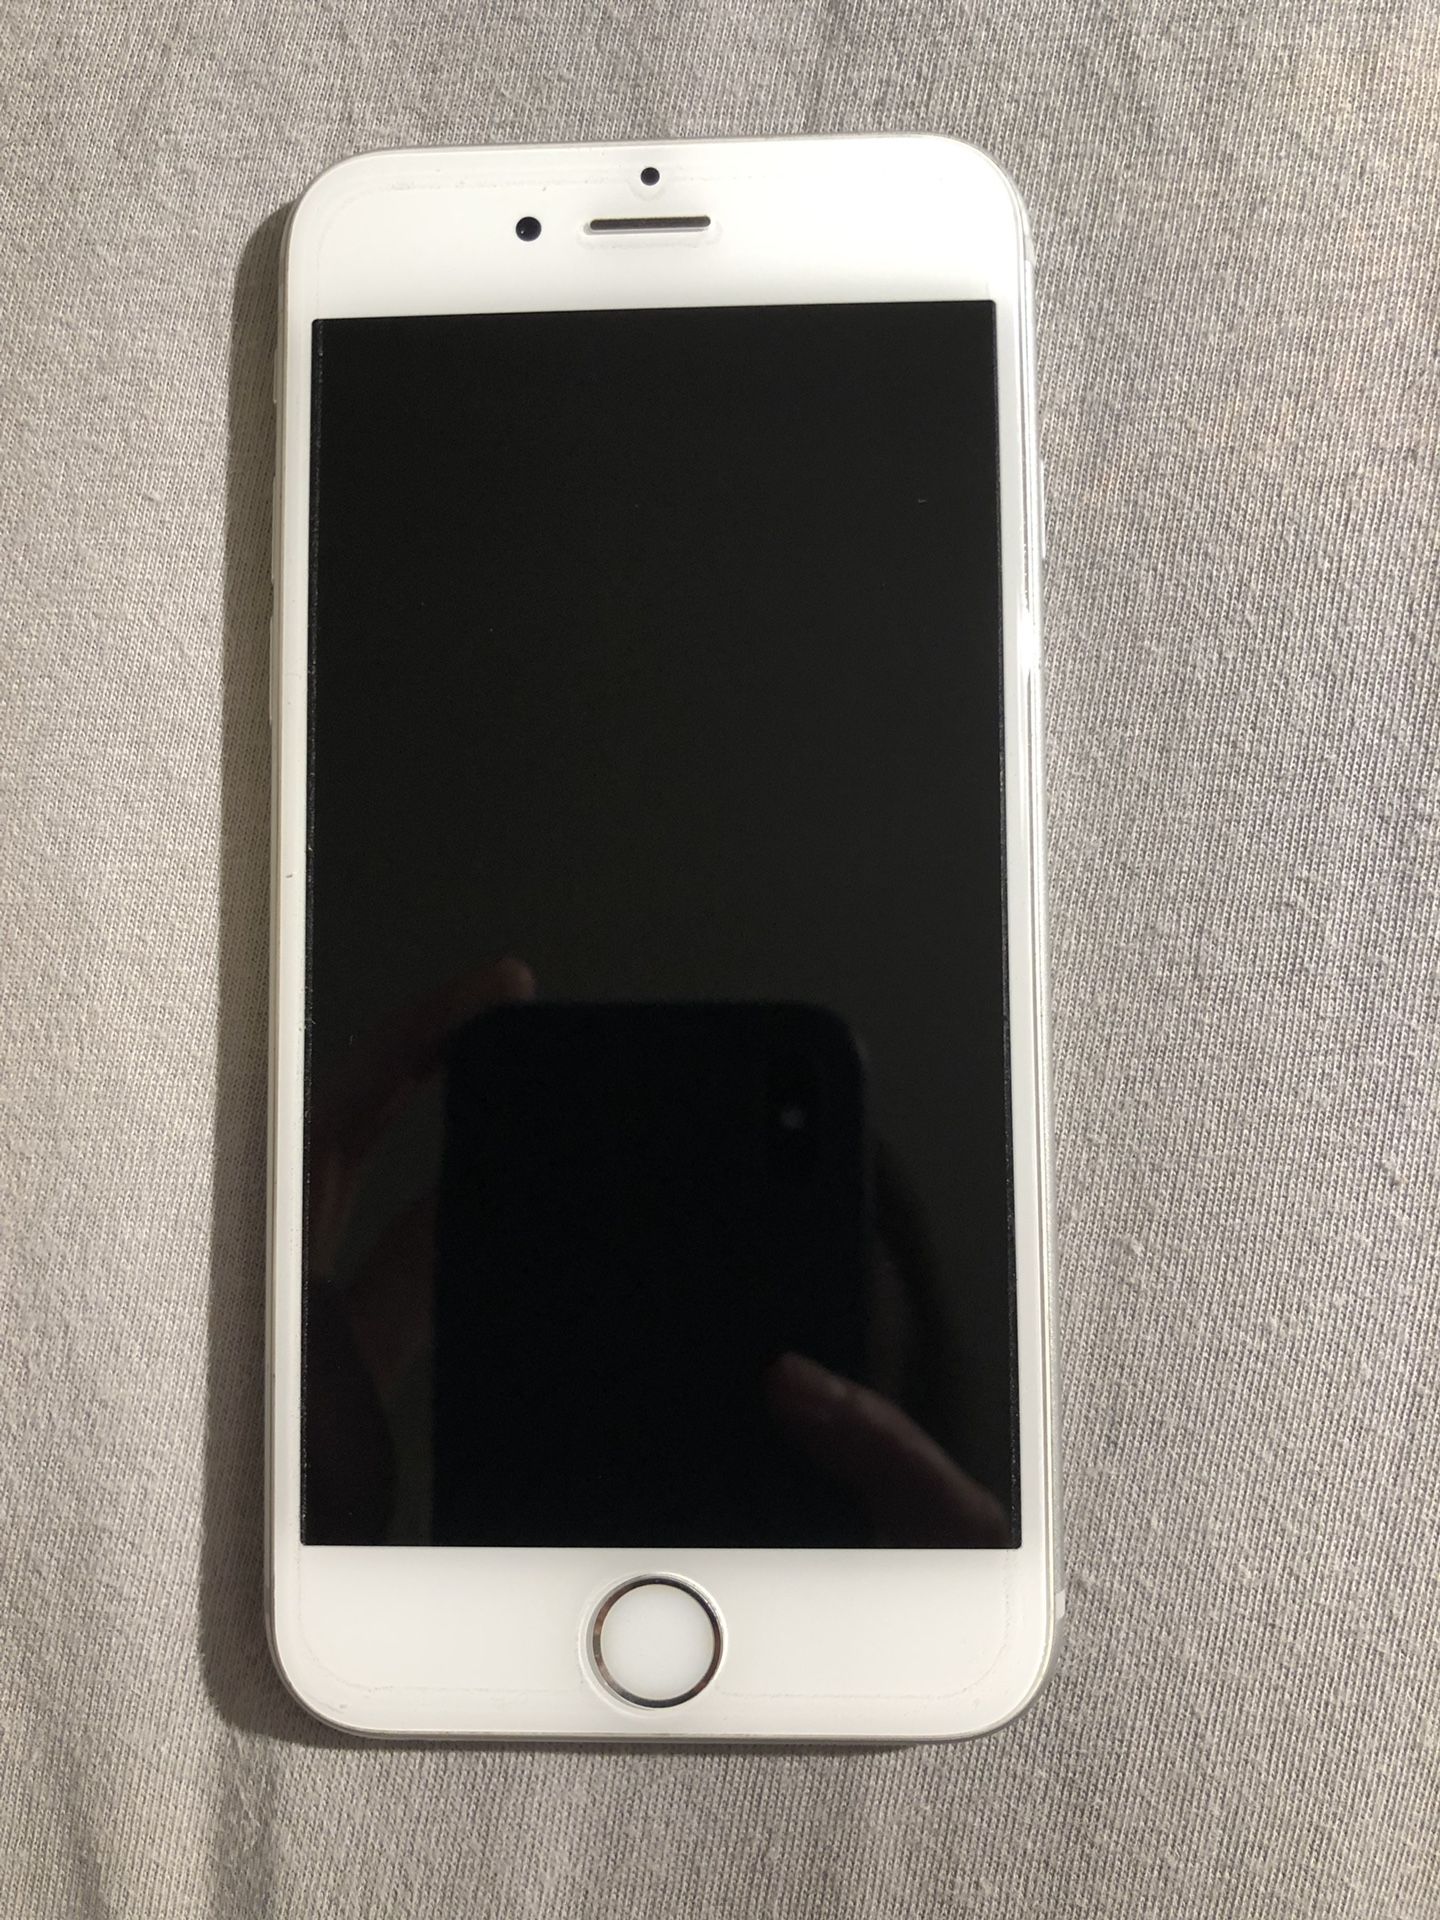 iPhone 6s , 64Gb, excellent condition